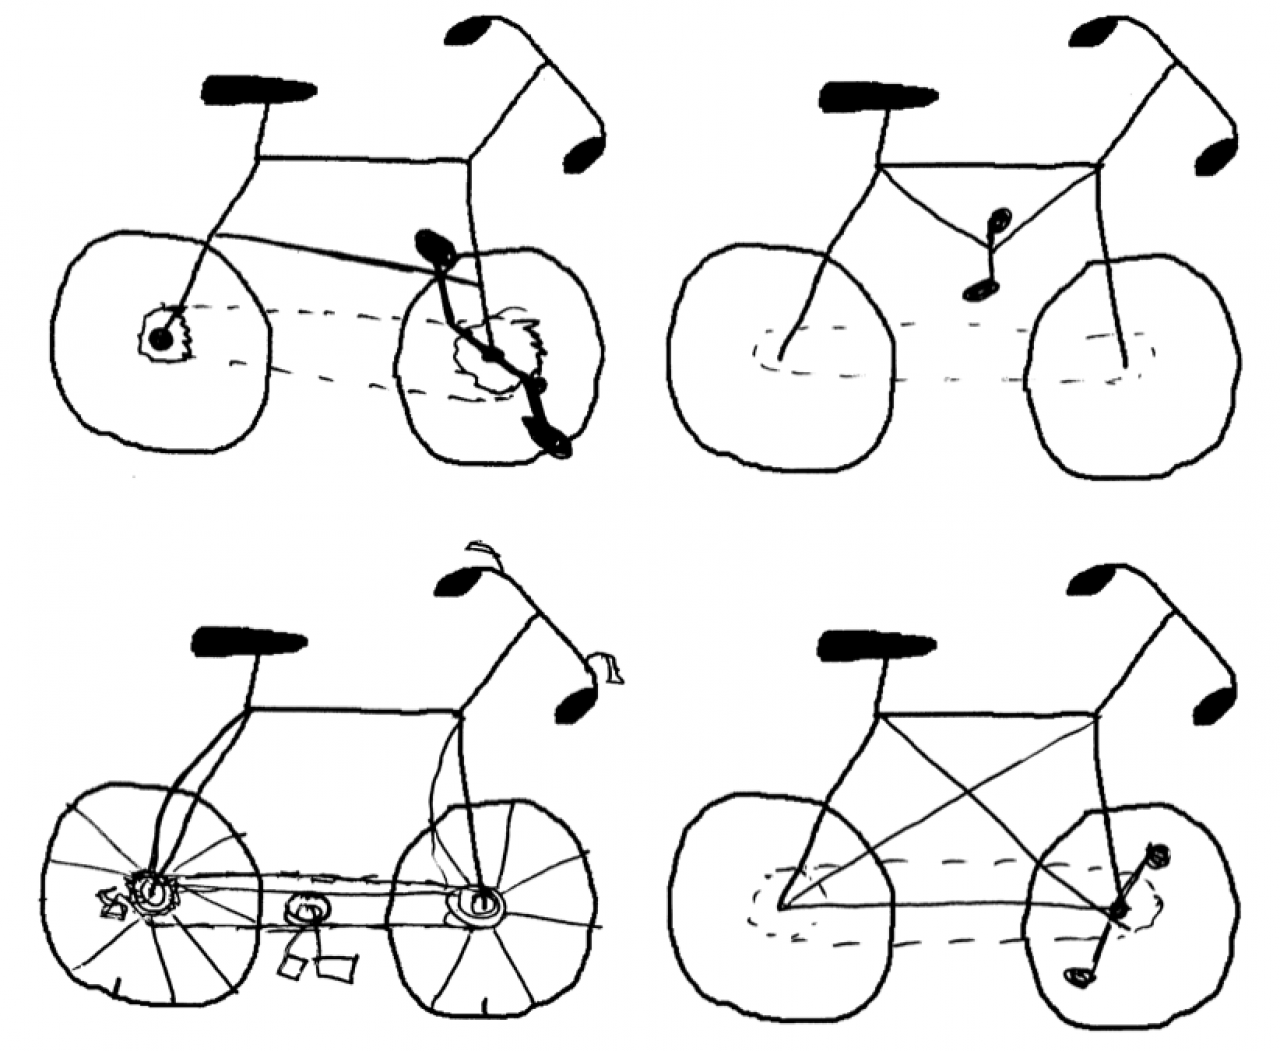 Easy How to Draw a Bike Tutorial and Bike Coloring Page